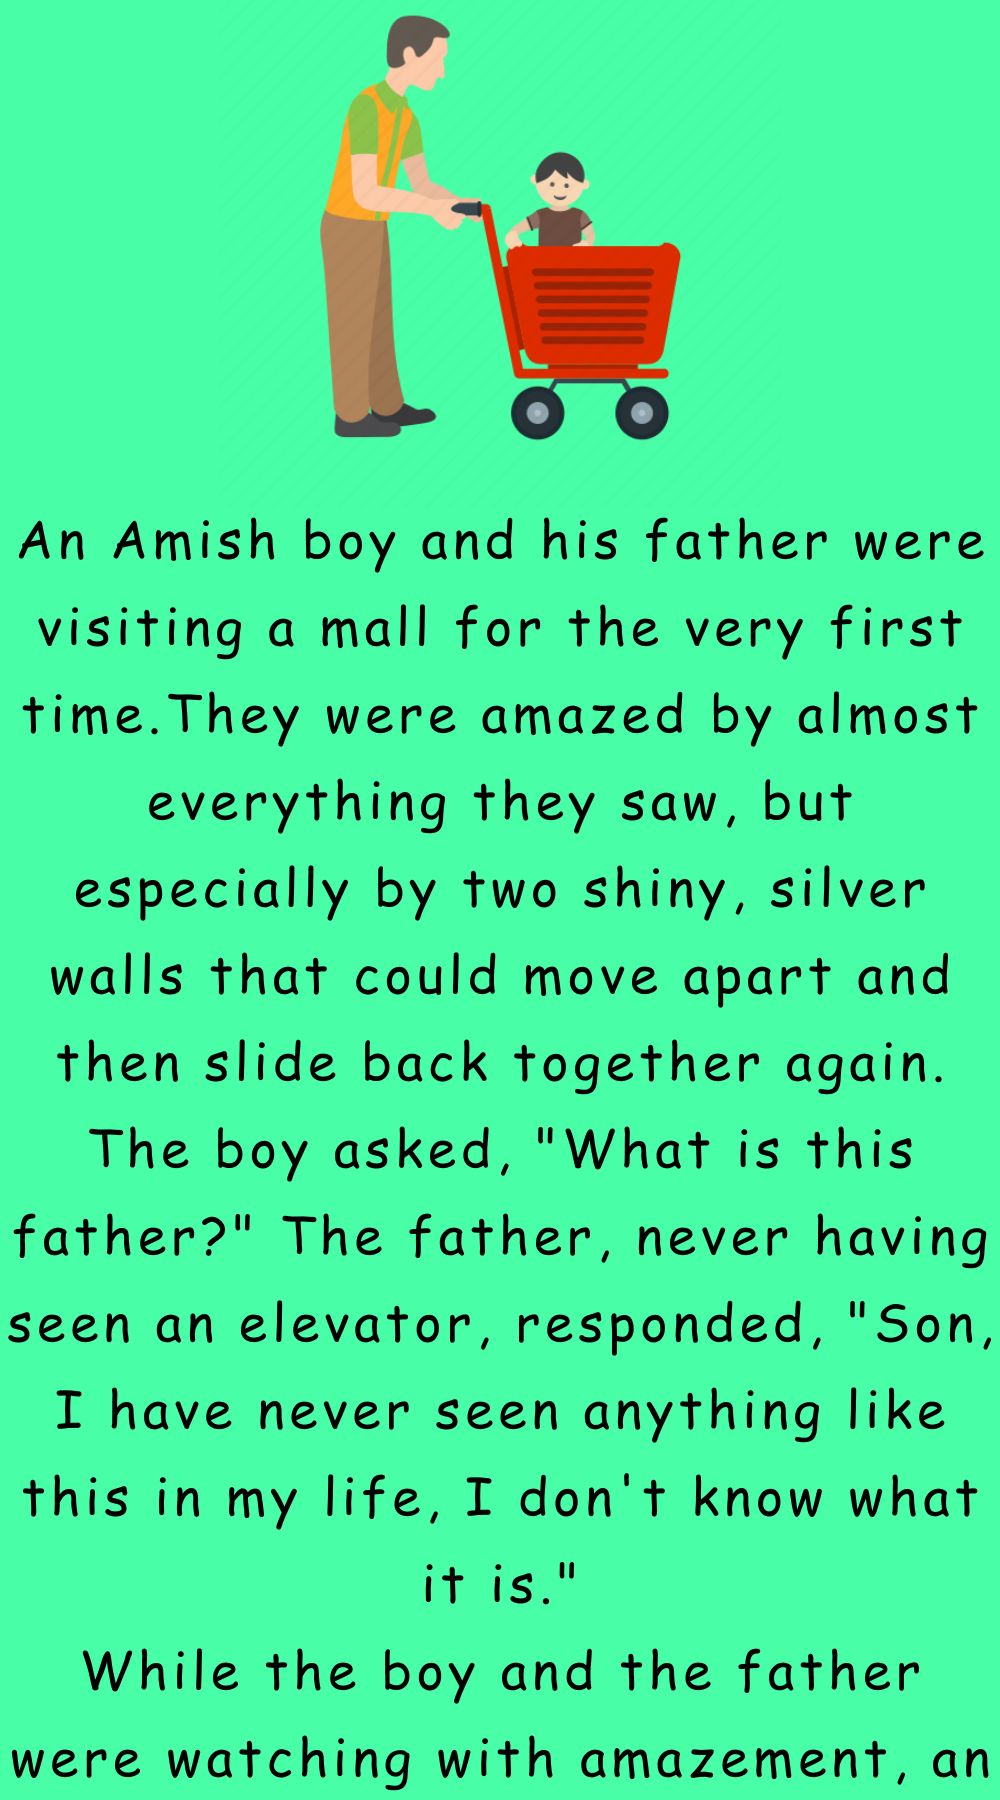 An Amish boy and his father were visiting a mall